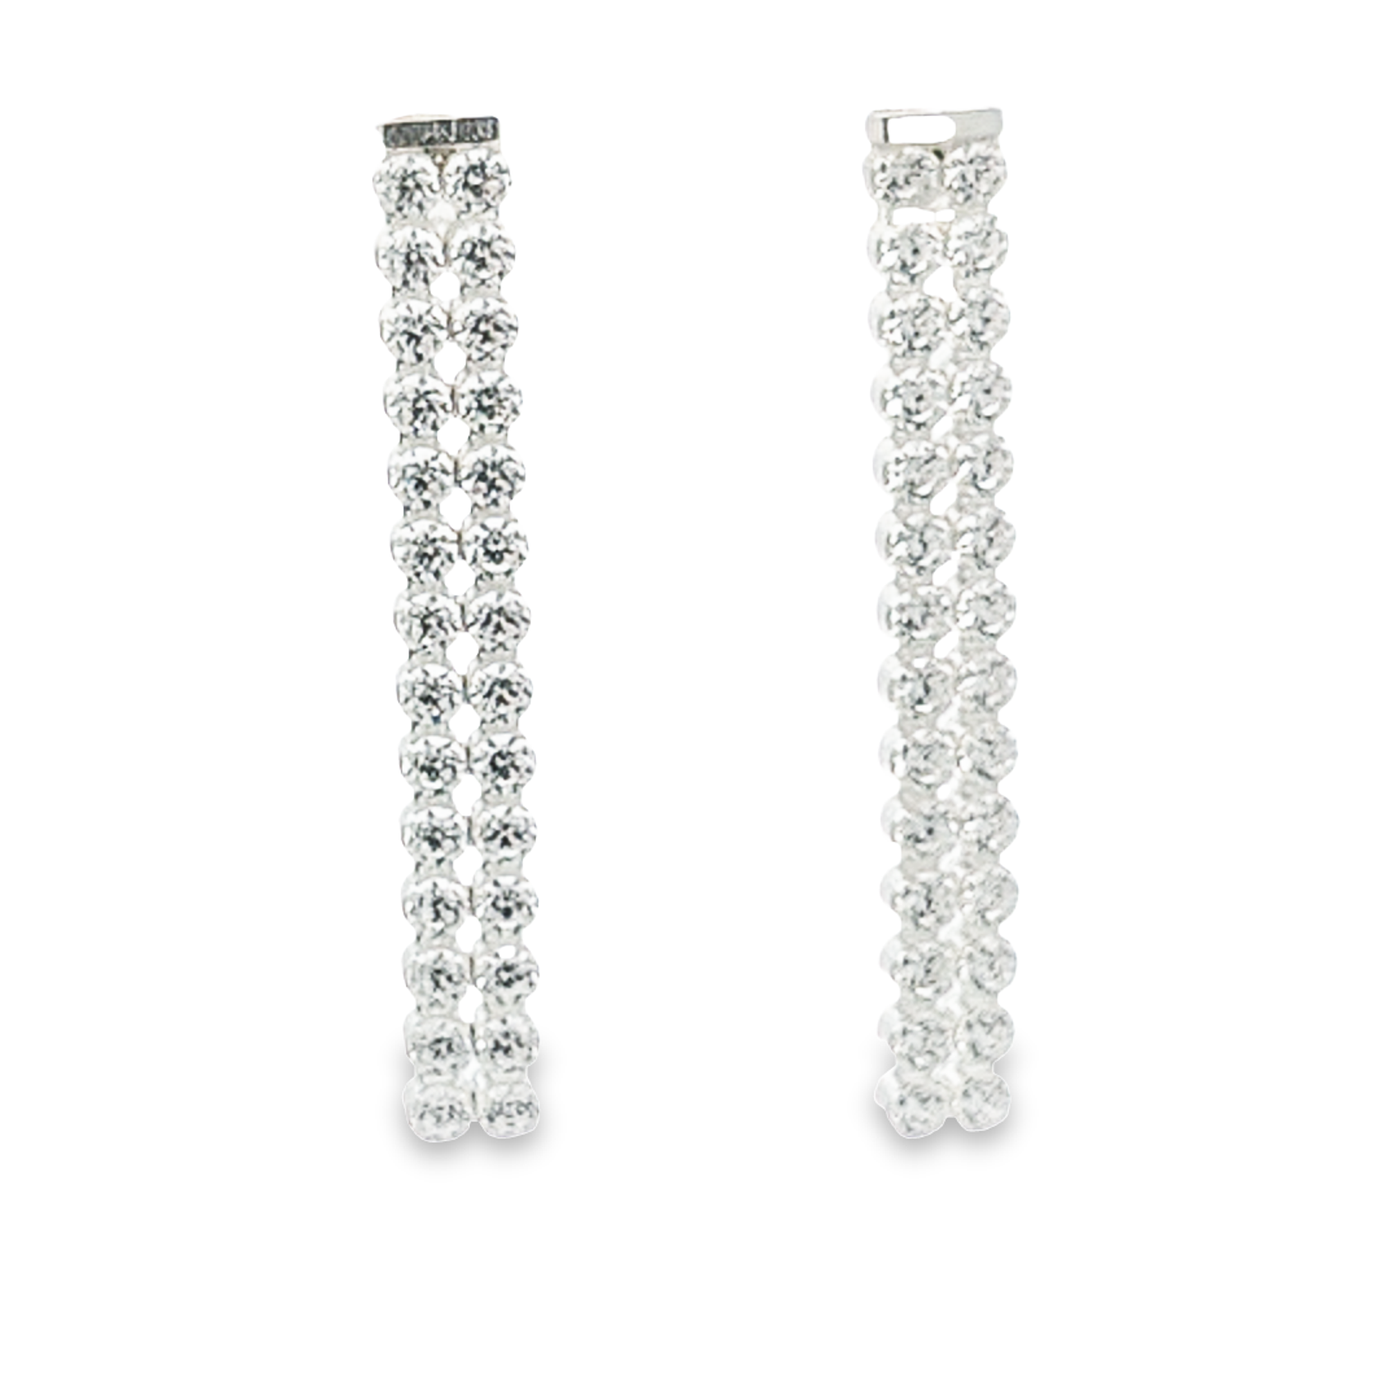 White Cubic Zirconia and Sterling Silver Earrings - Sherry - boothandbooth